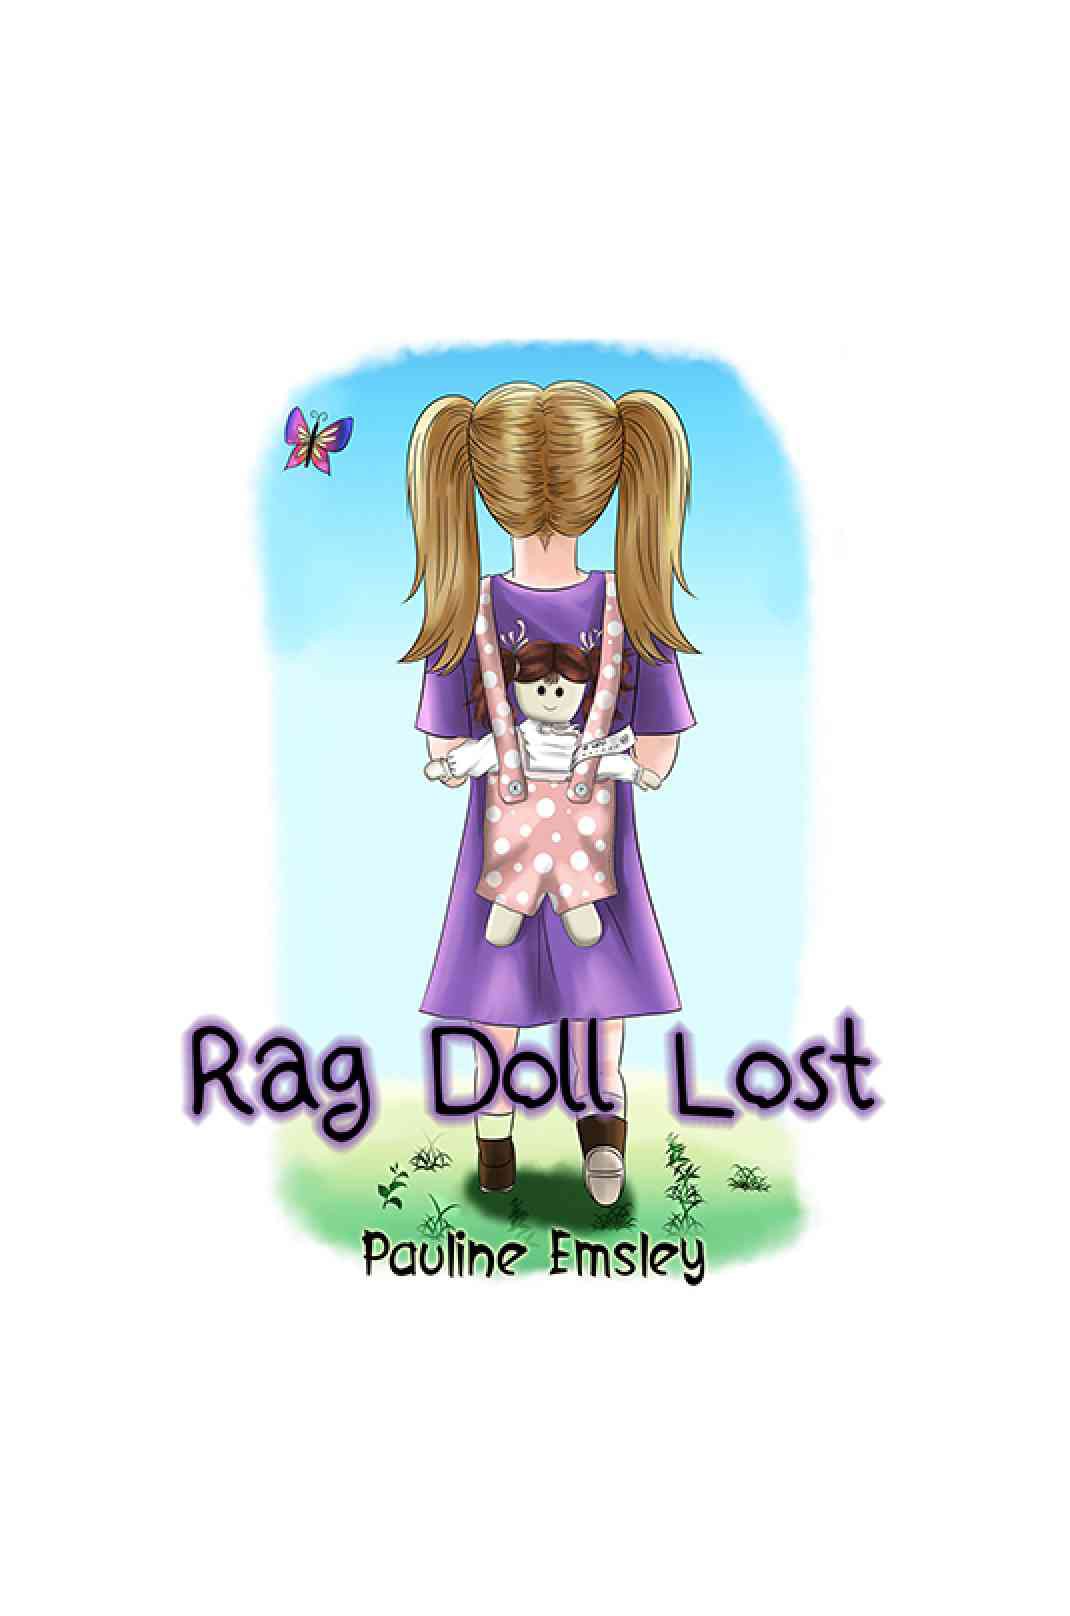 Pauline Emsley, the Author of ‘Rag Doll Lost’ Featured in the West Sussex County Times